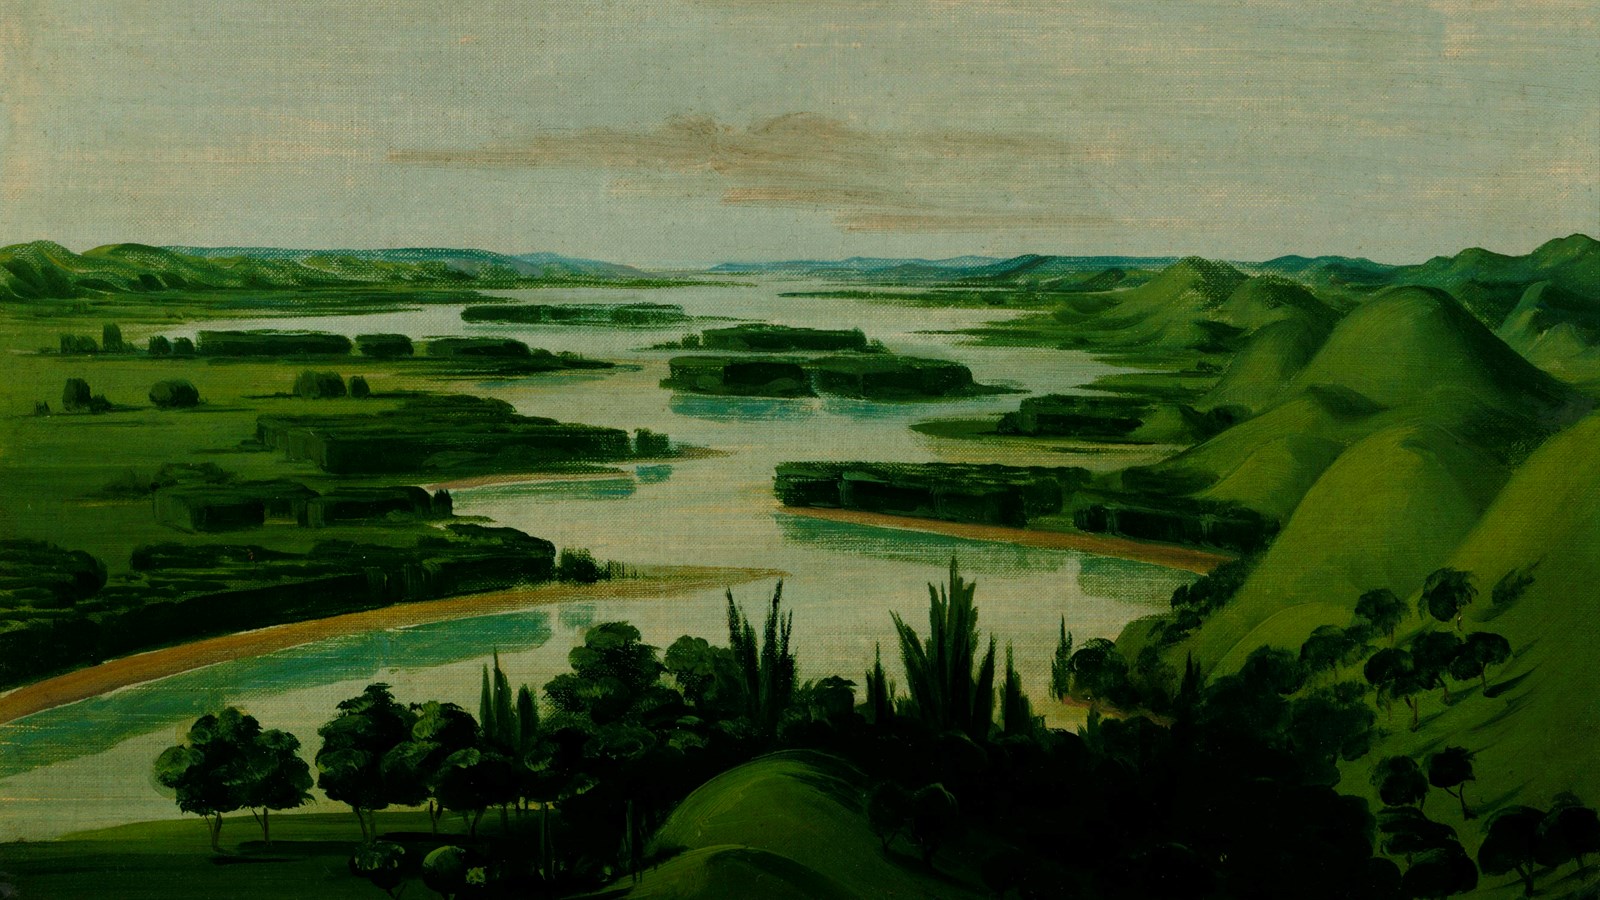 Painting of verdant river valley, with grassy hills on either side and forested islans in the river\'